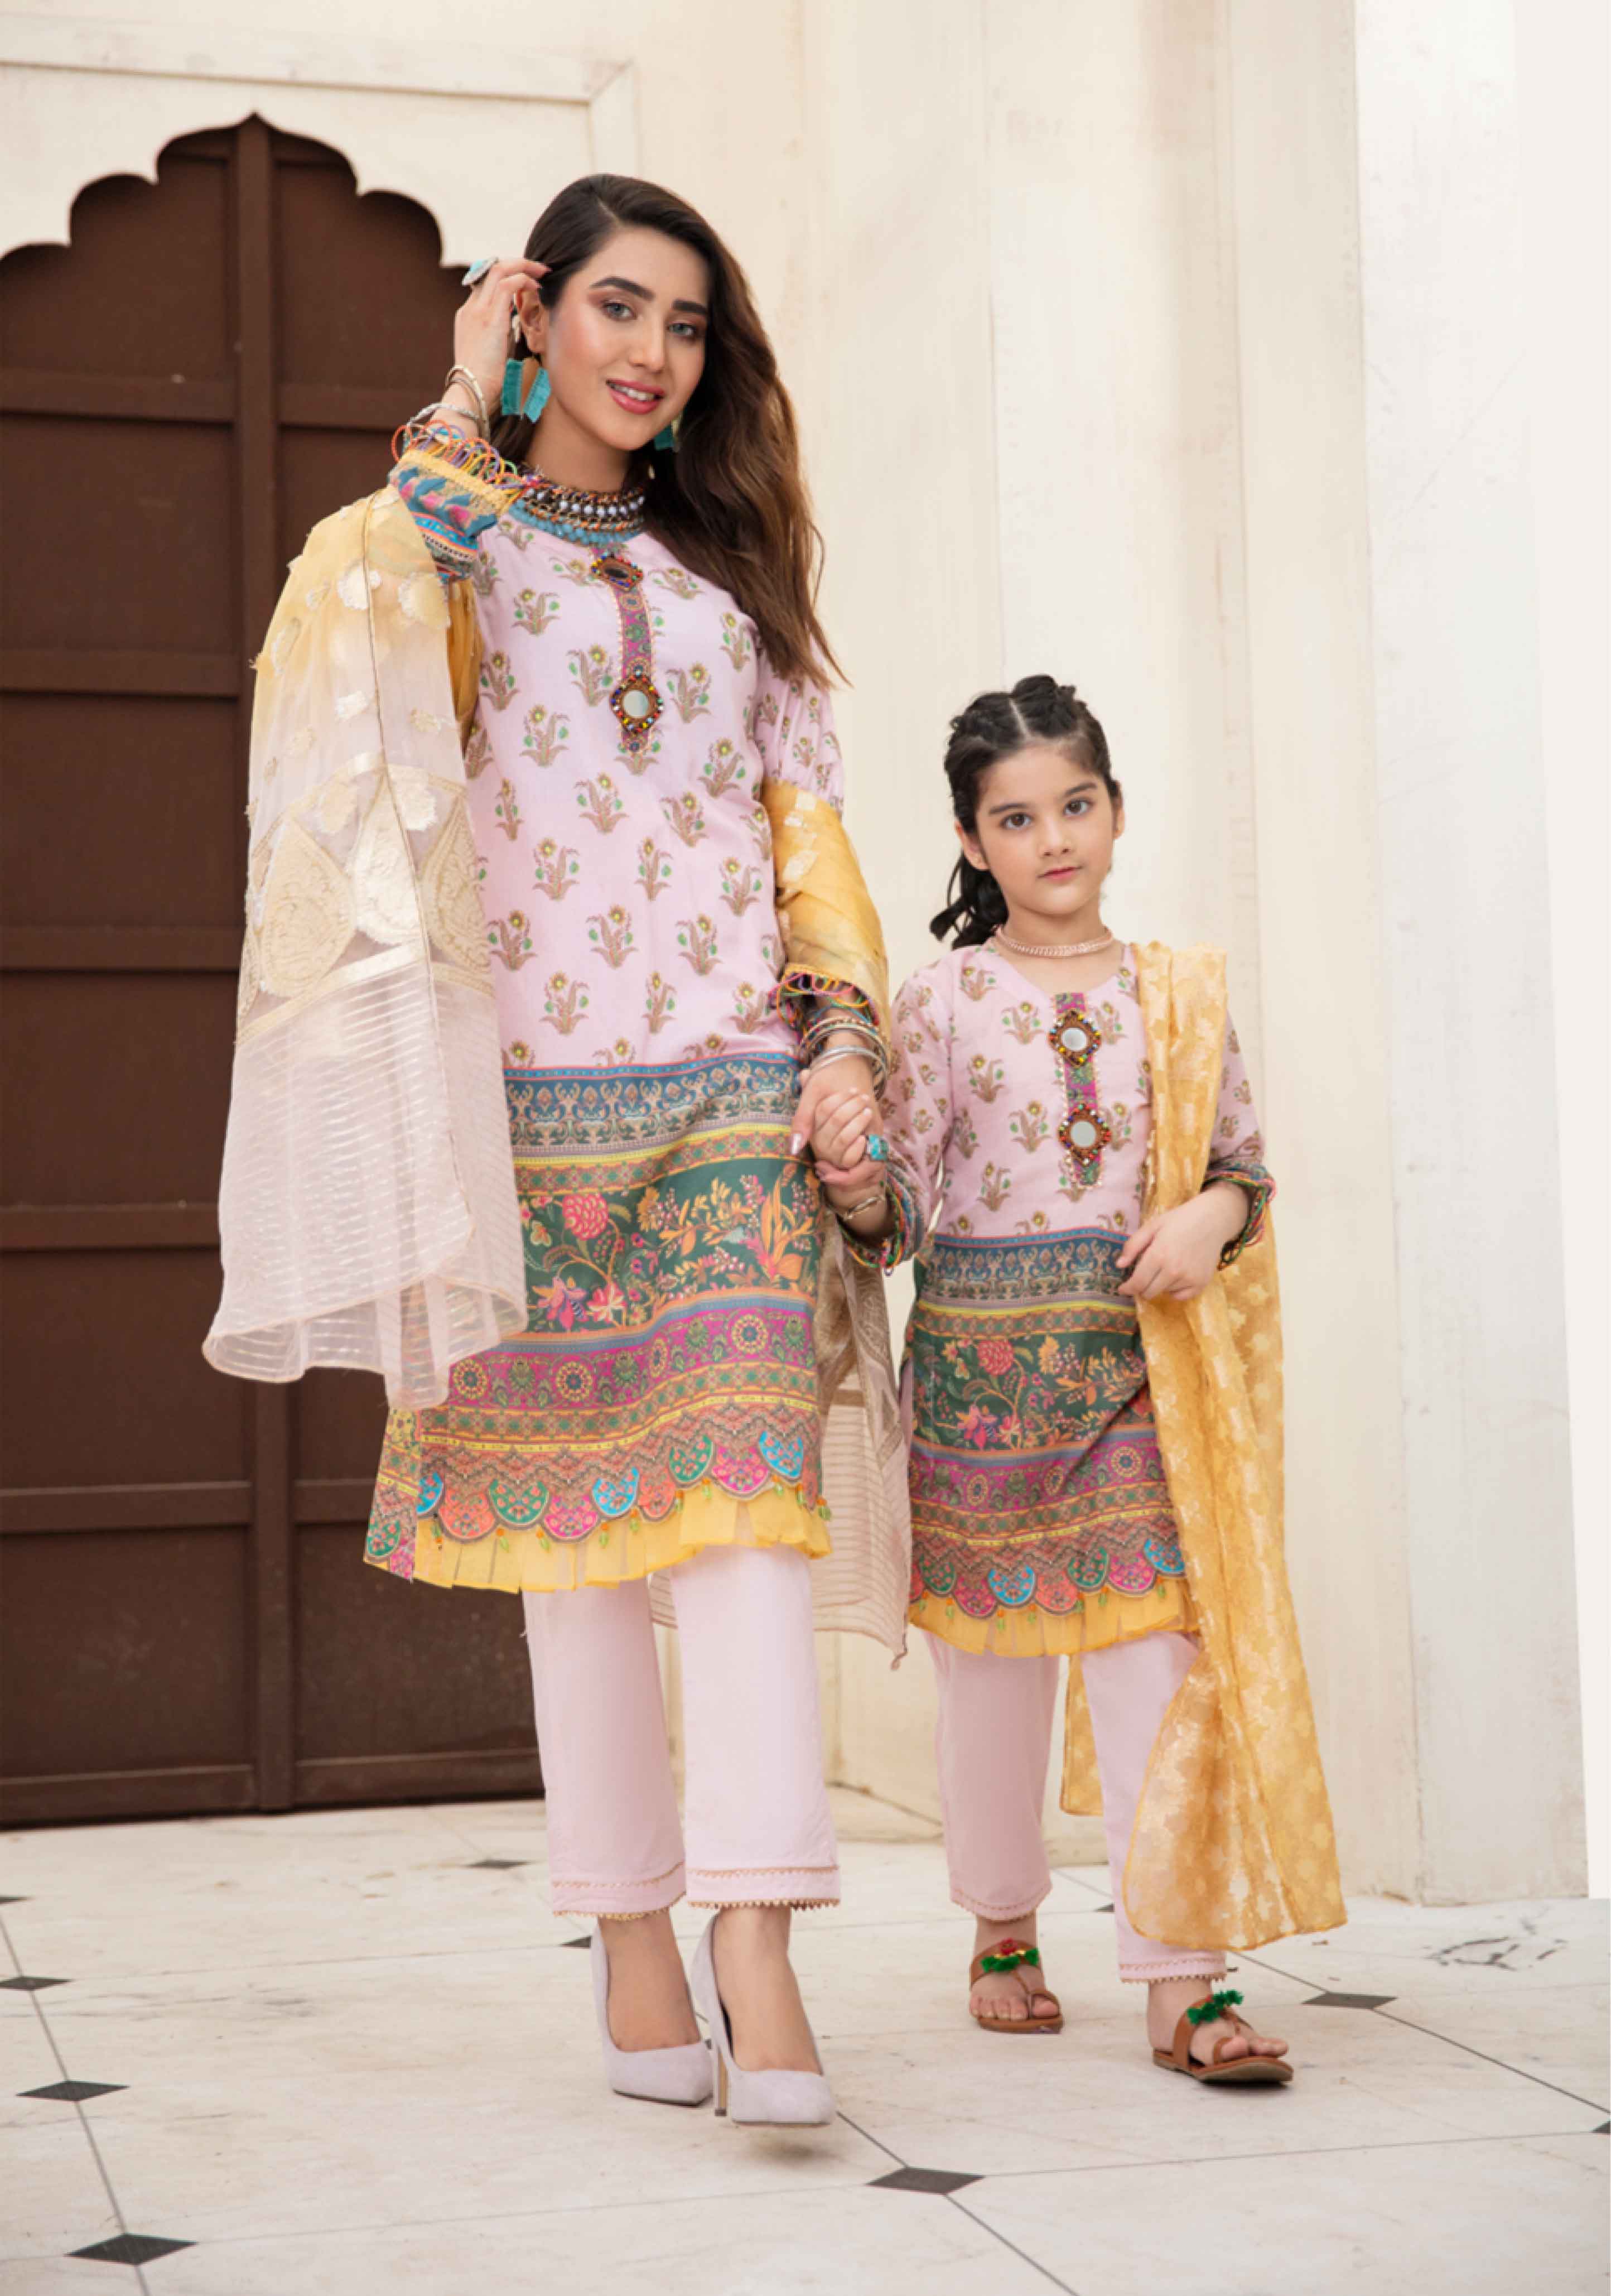 Simrans Girls Afsaneh Mummy & Me Outfit SMP02K